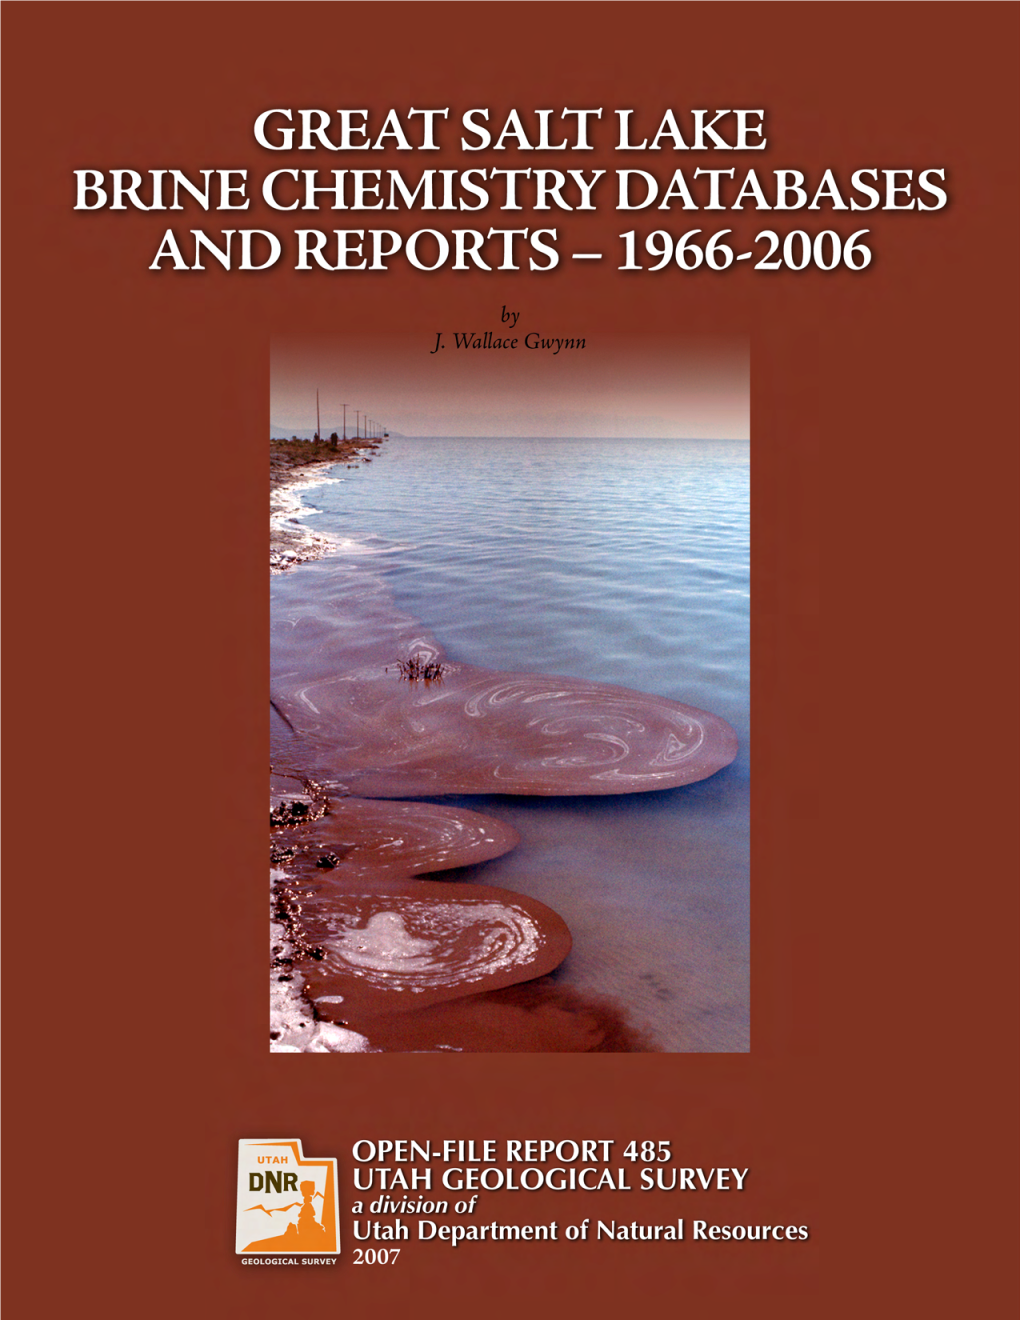 Great Salt Lake Brine Chemistry Databases and Reports – 1966-2006